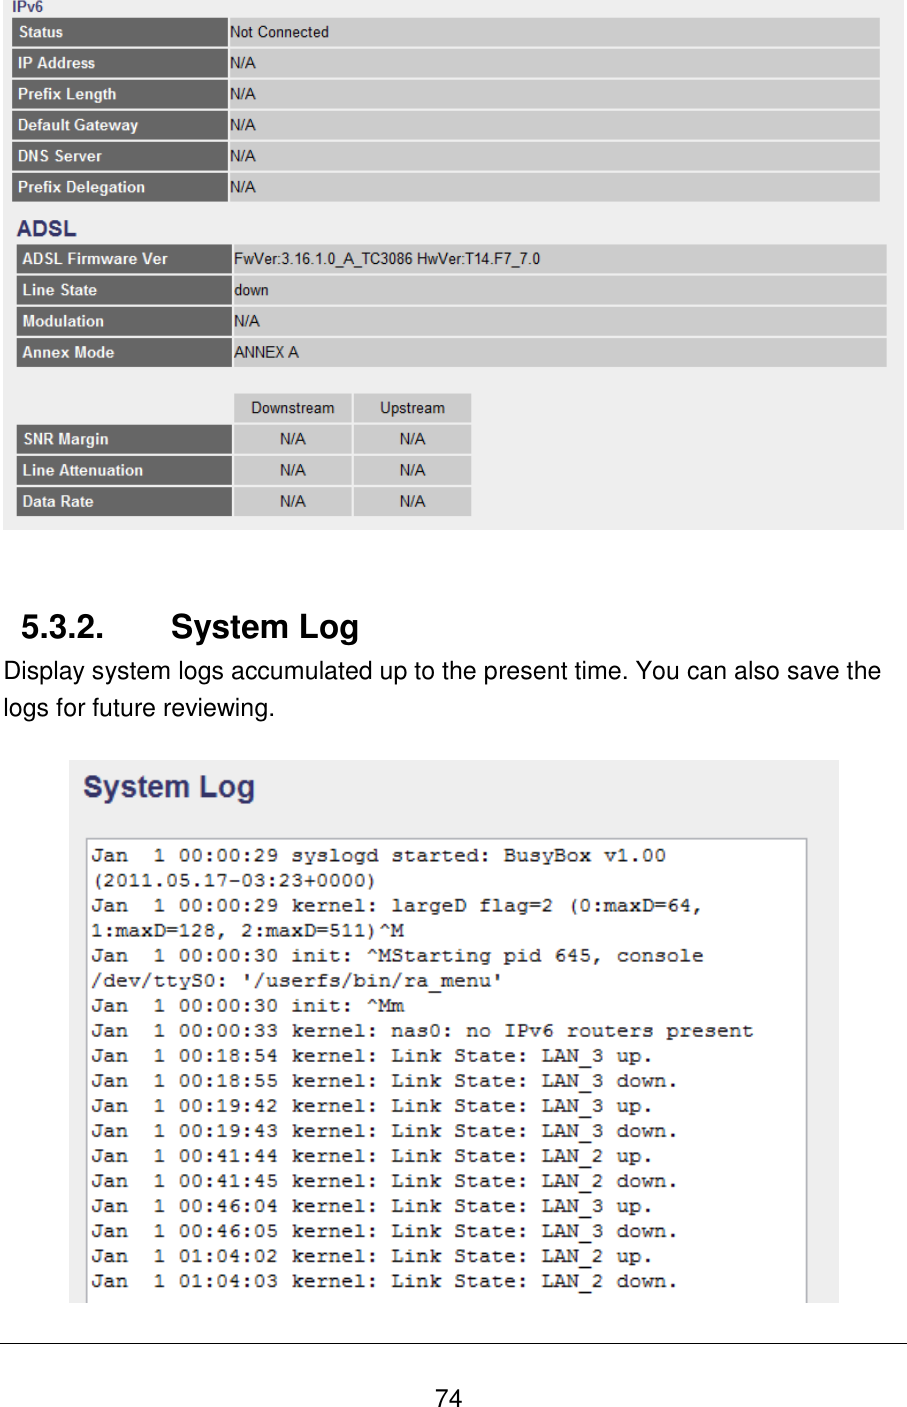   74     5.3.2.  System Log Display system logs accumulated up to the present time. You can also save the logs for future reviewing.    